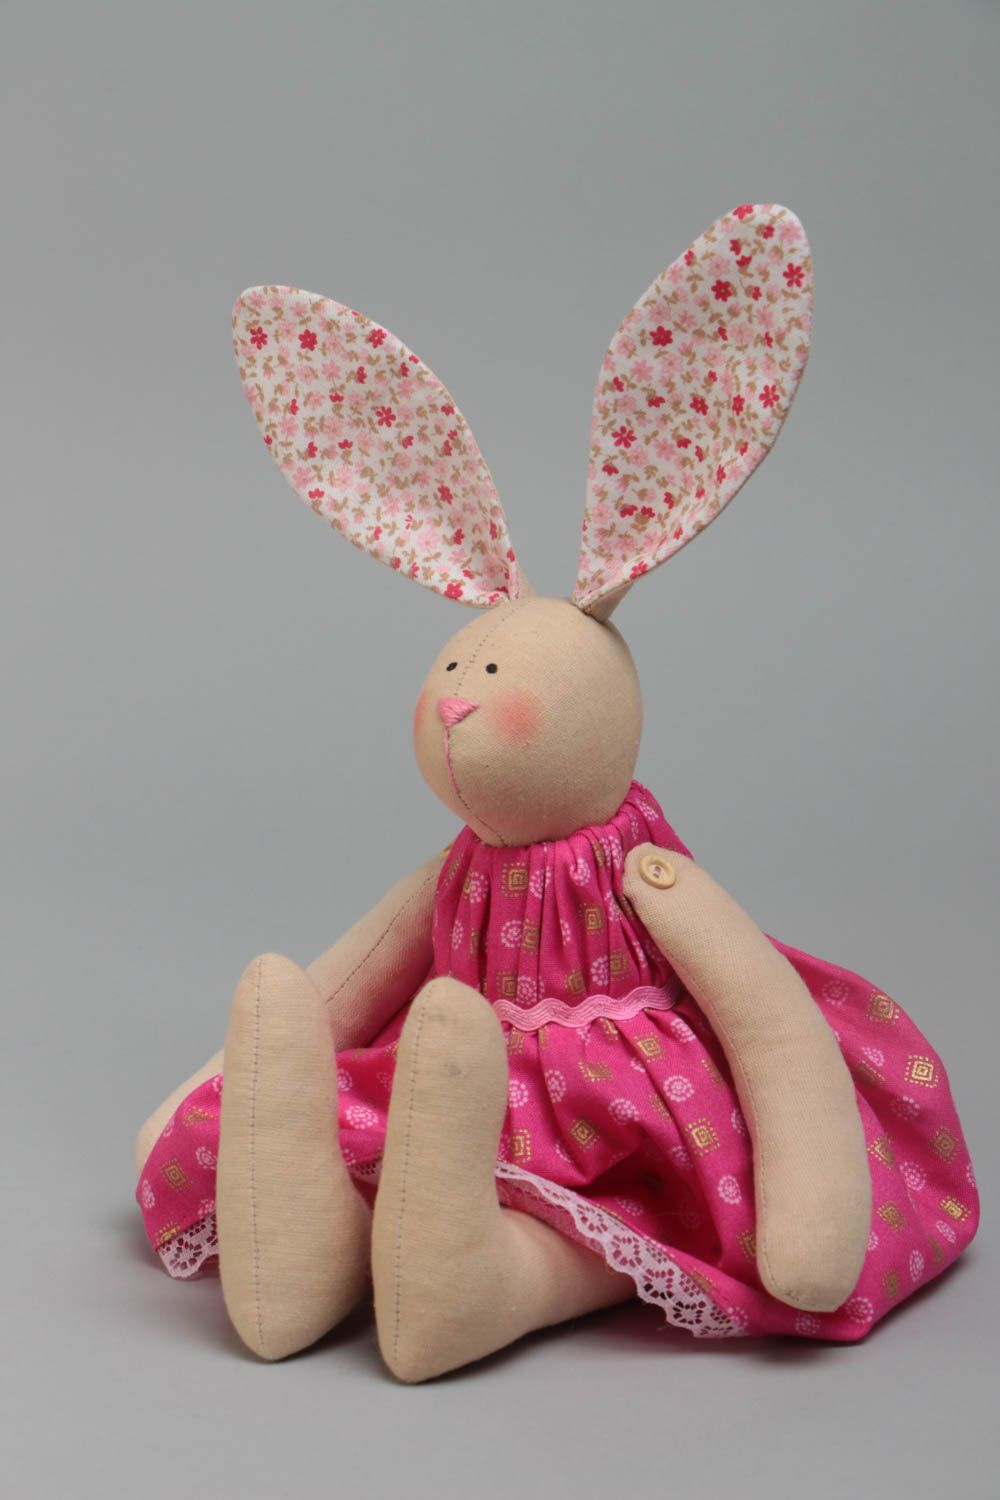 Designer handmade cotton fabric soft toy rabbit girl with long ears in dress photo 2